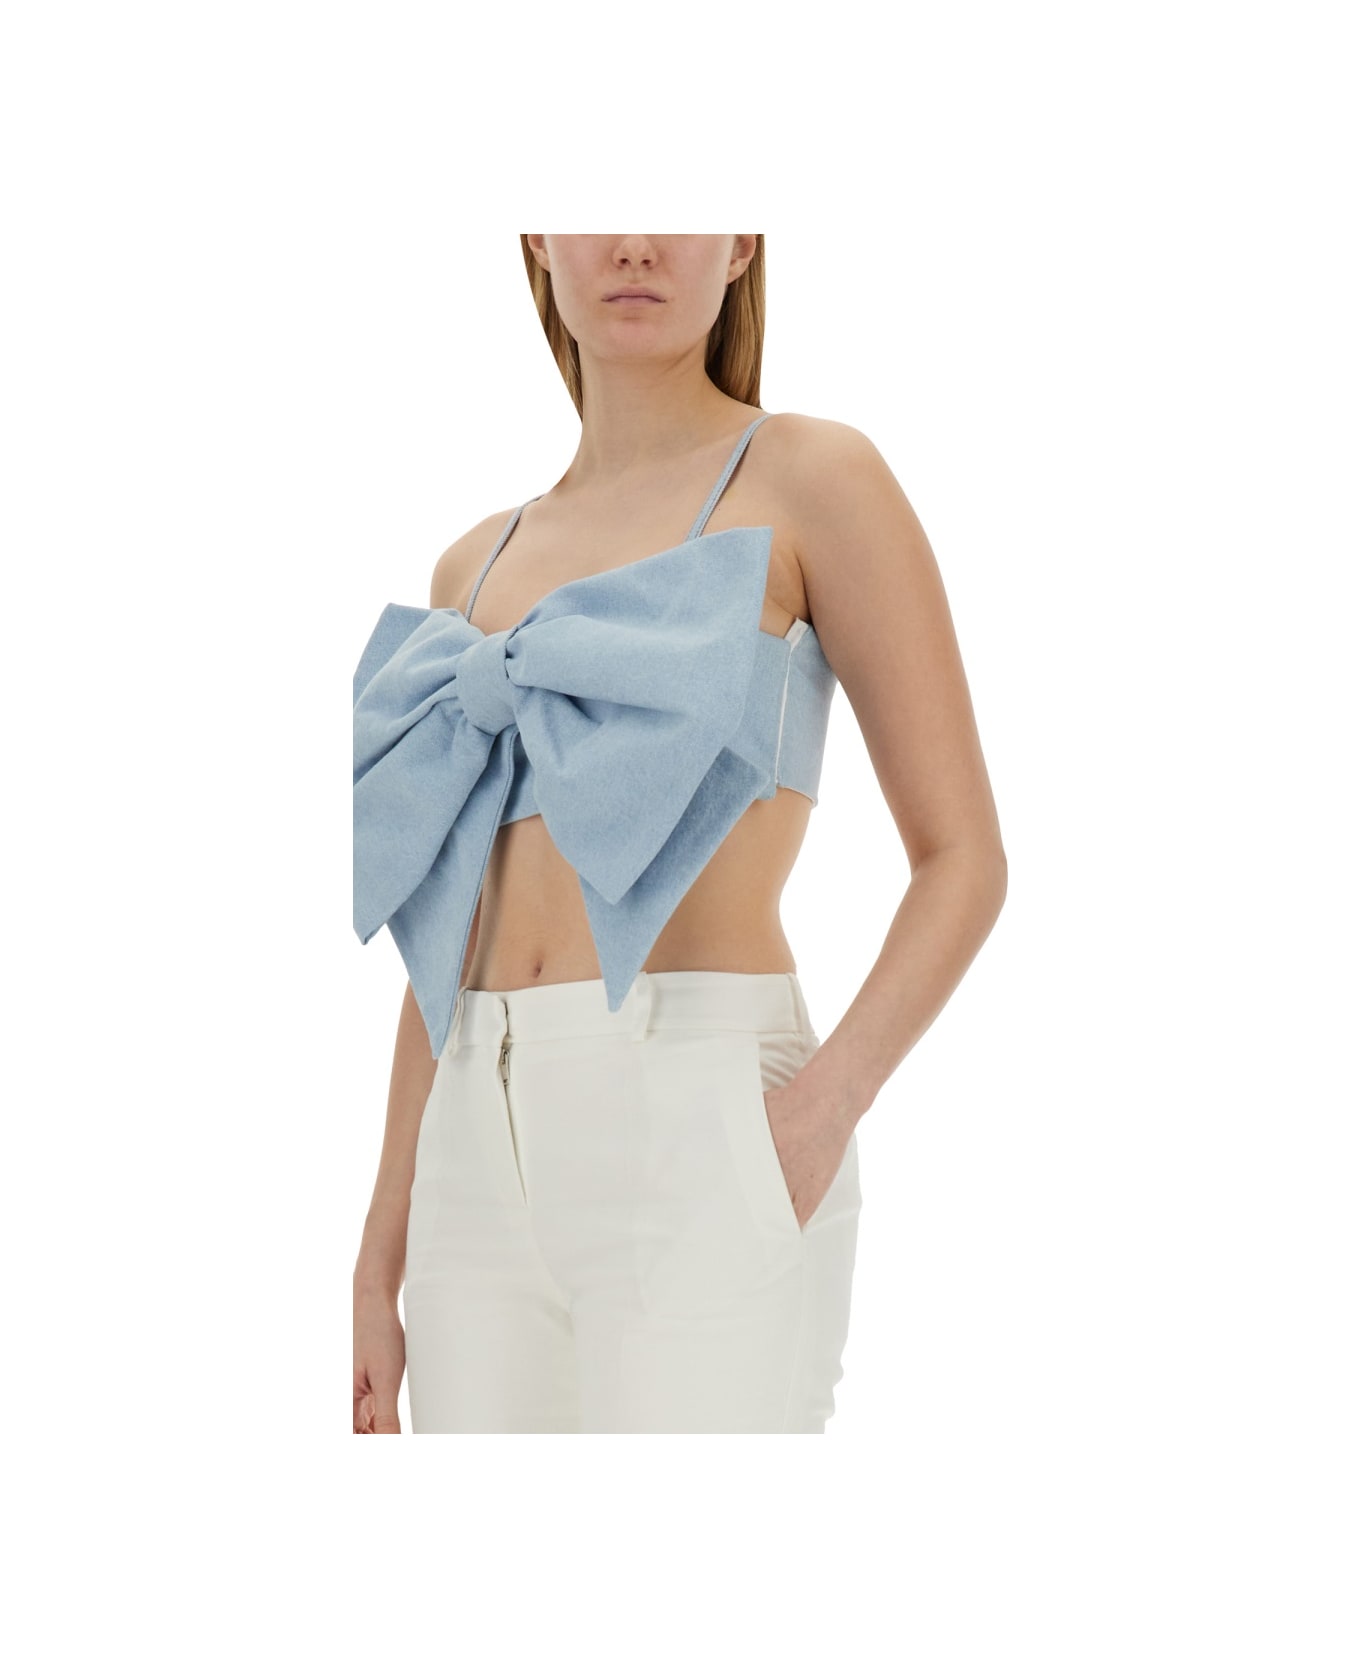 Nina Ricci Top With Bow - Light Blue トップス